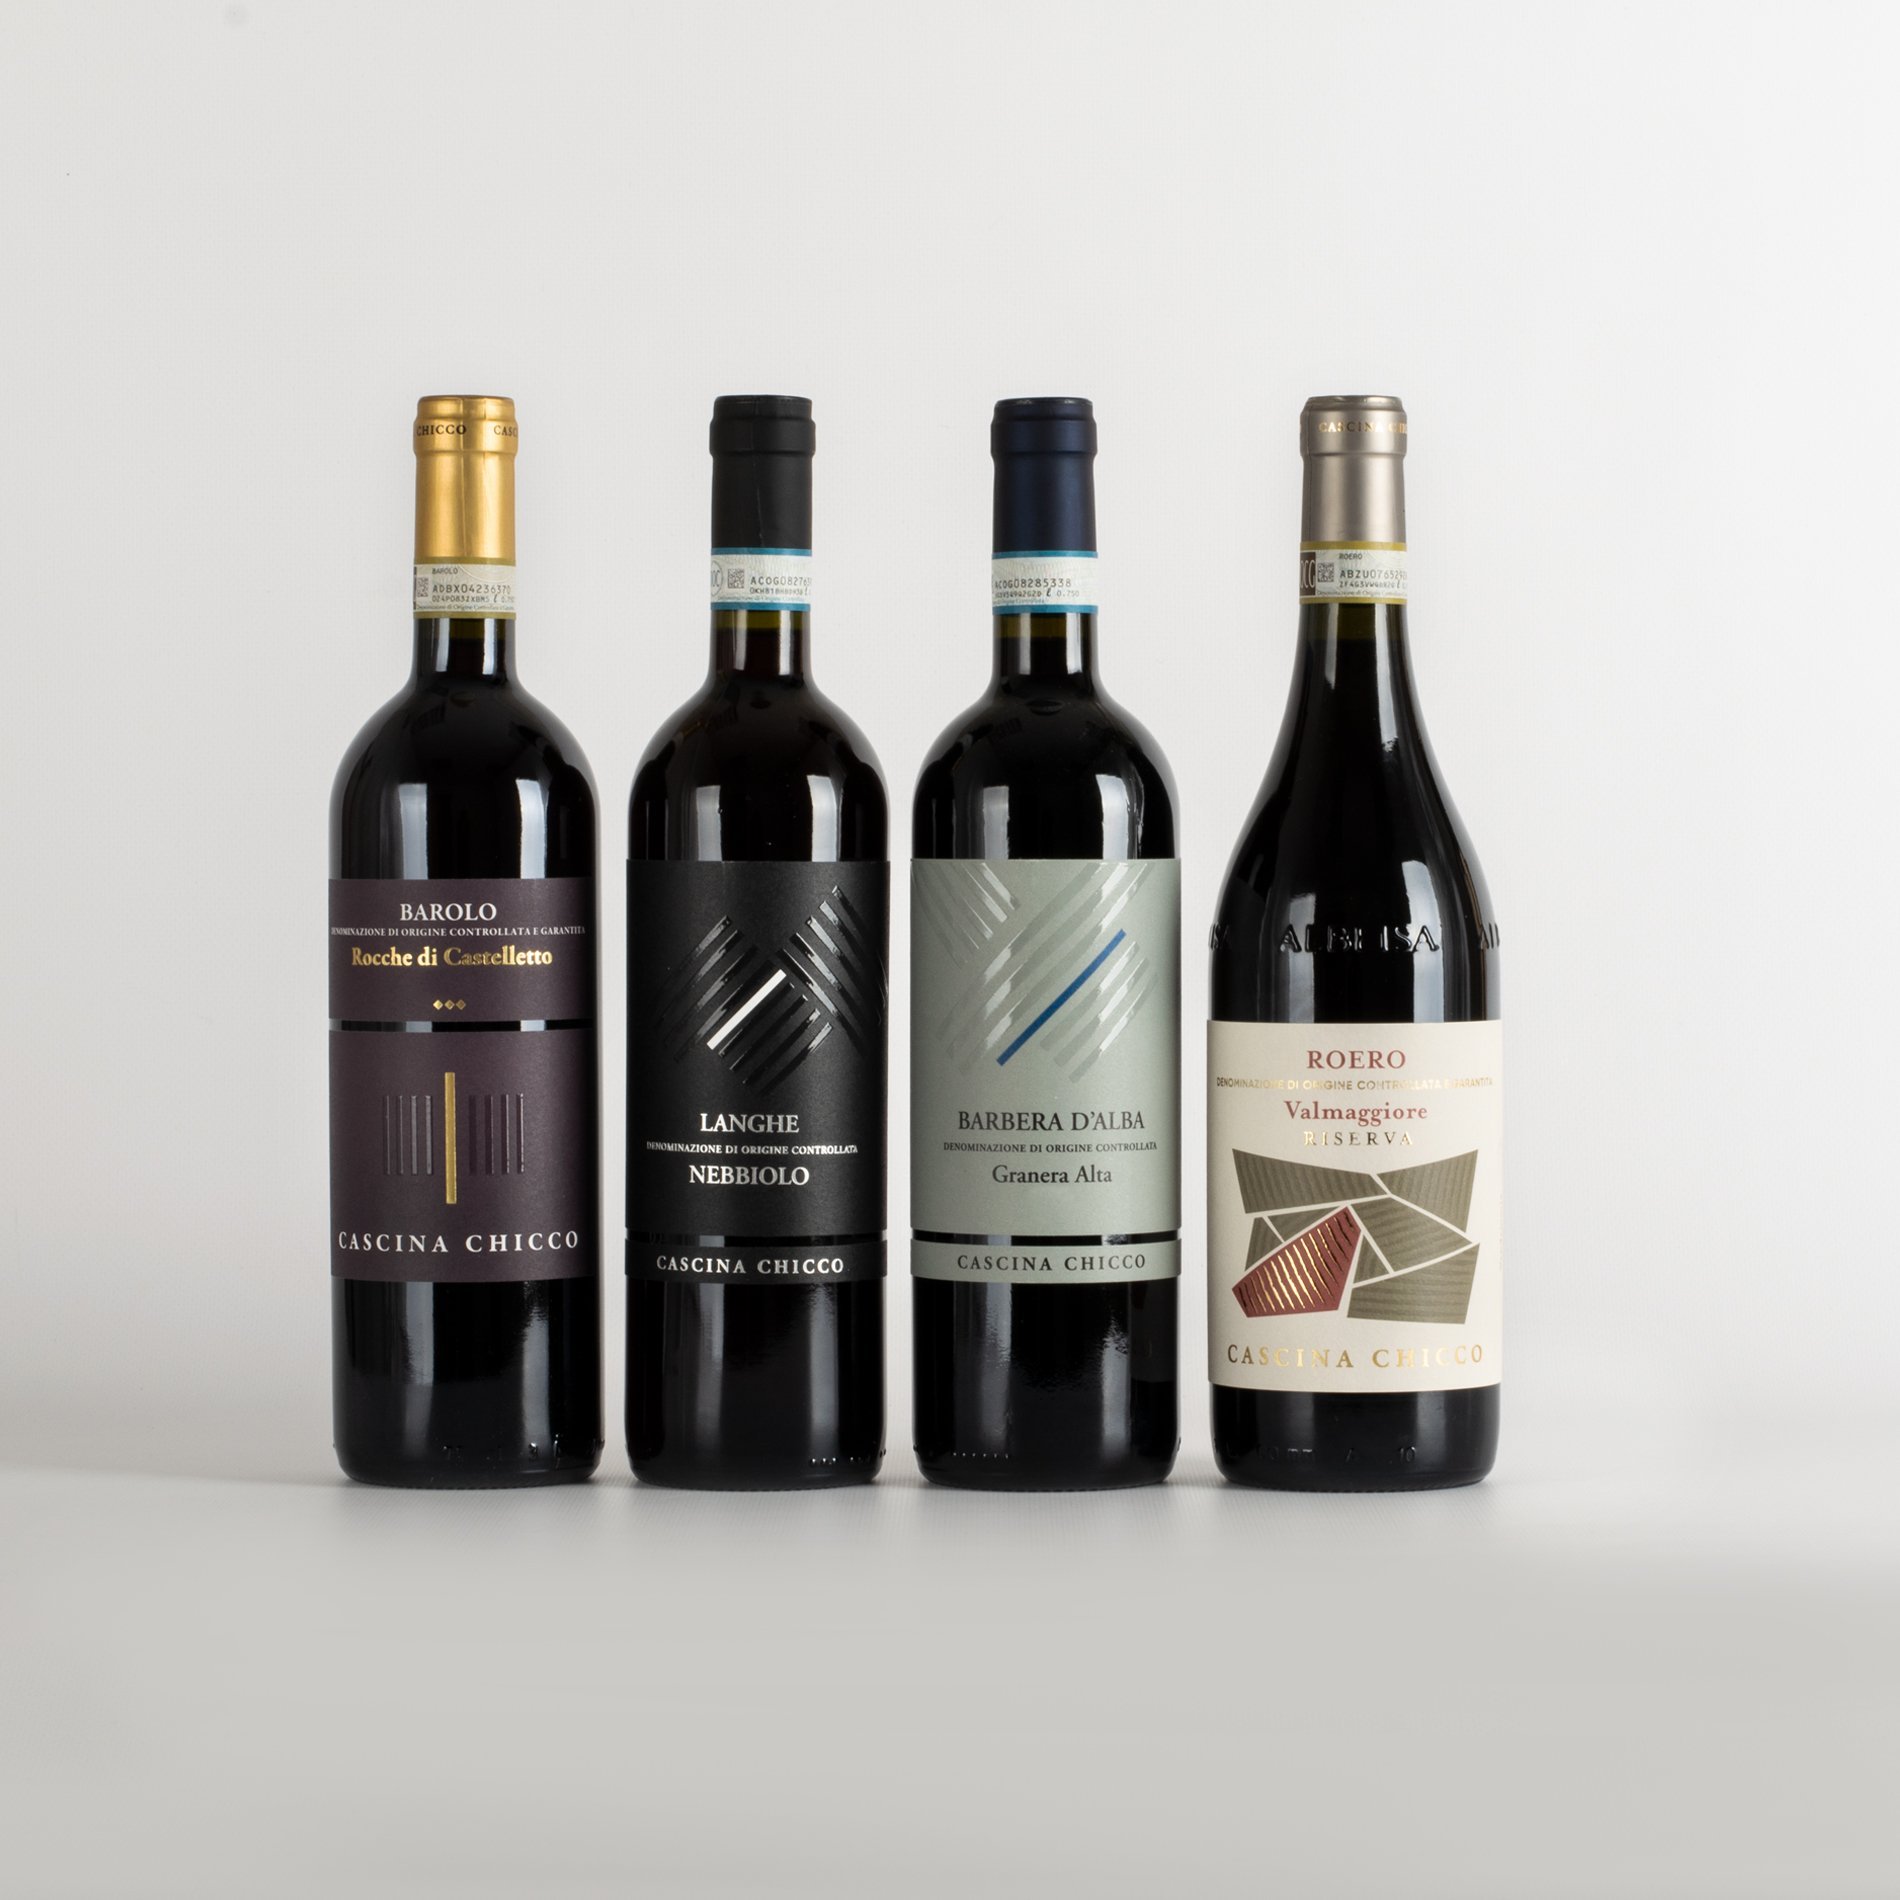 Discover the Red Wines of Cascina Chicco